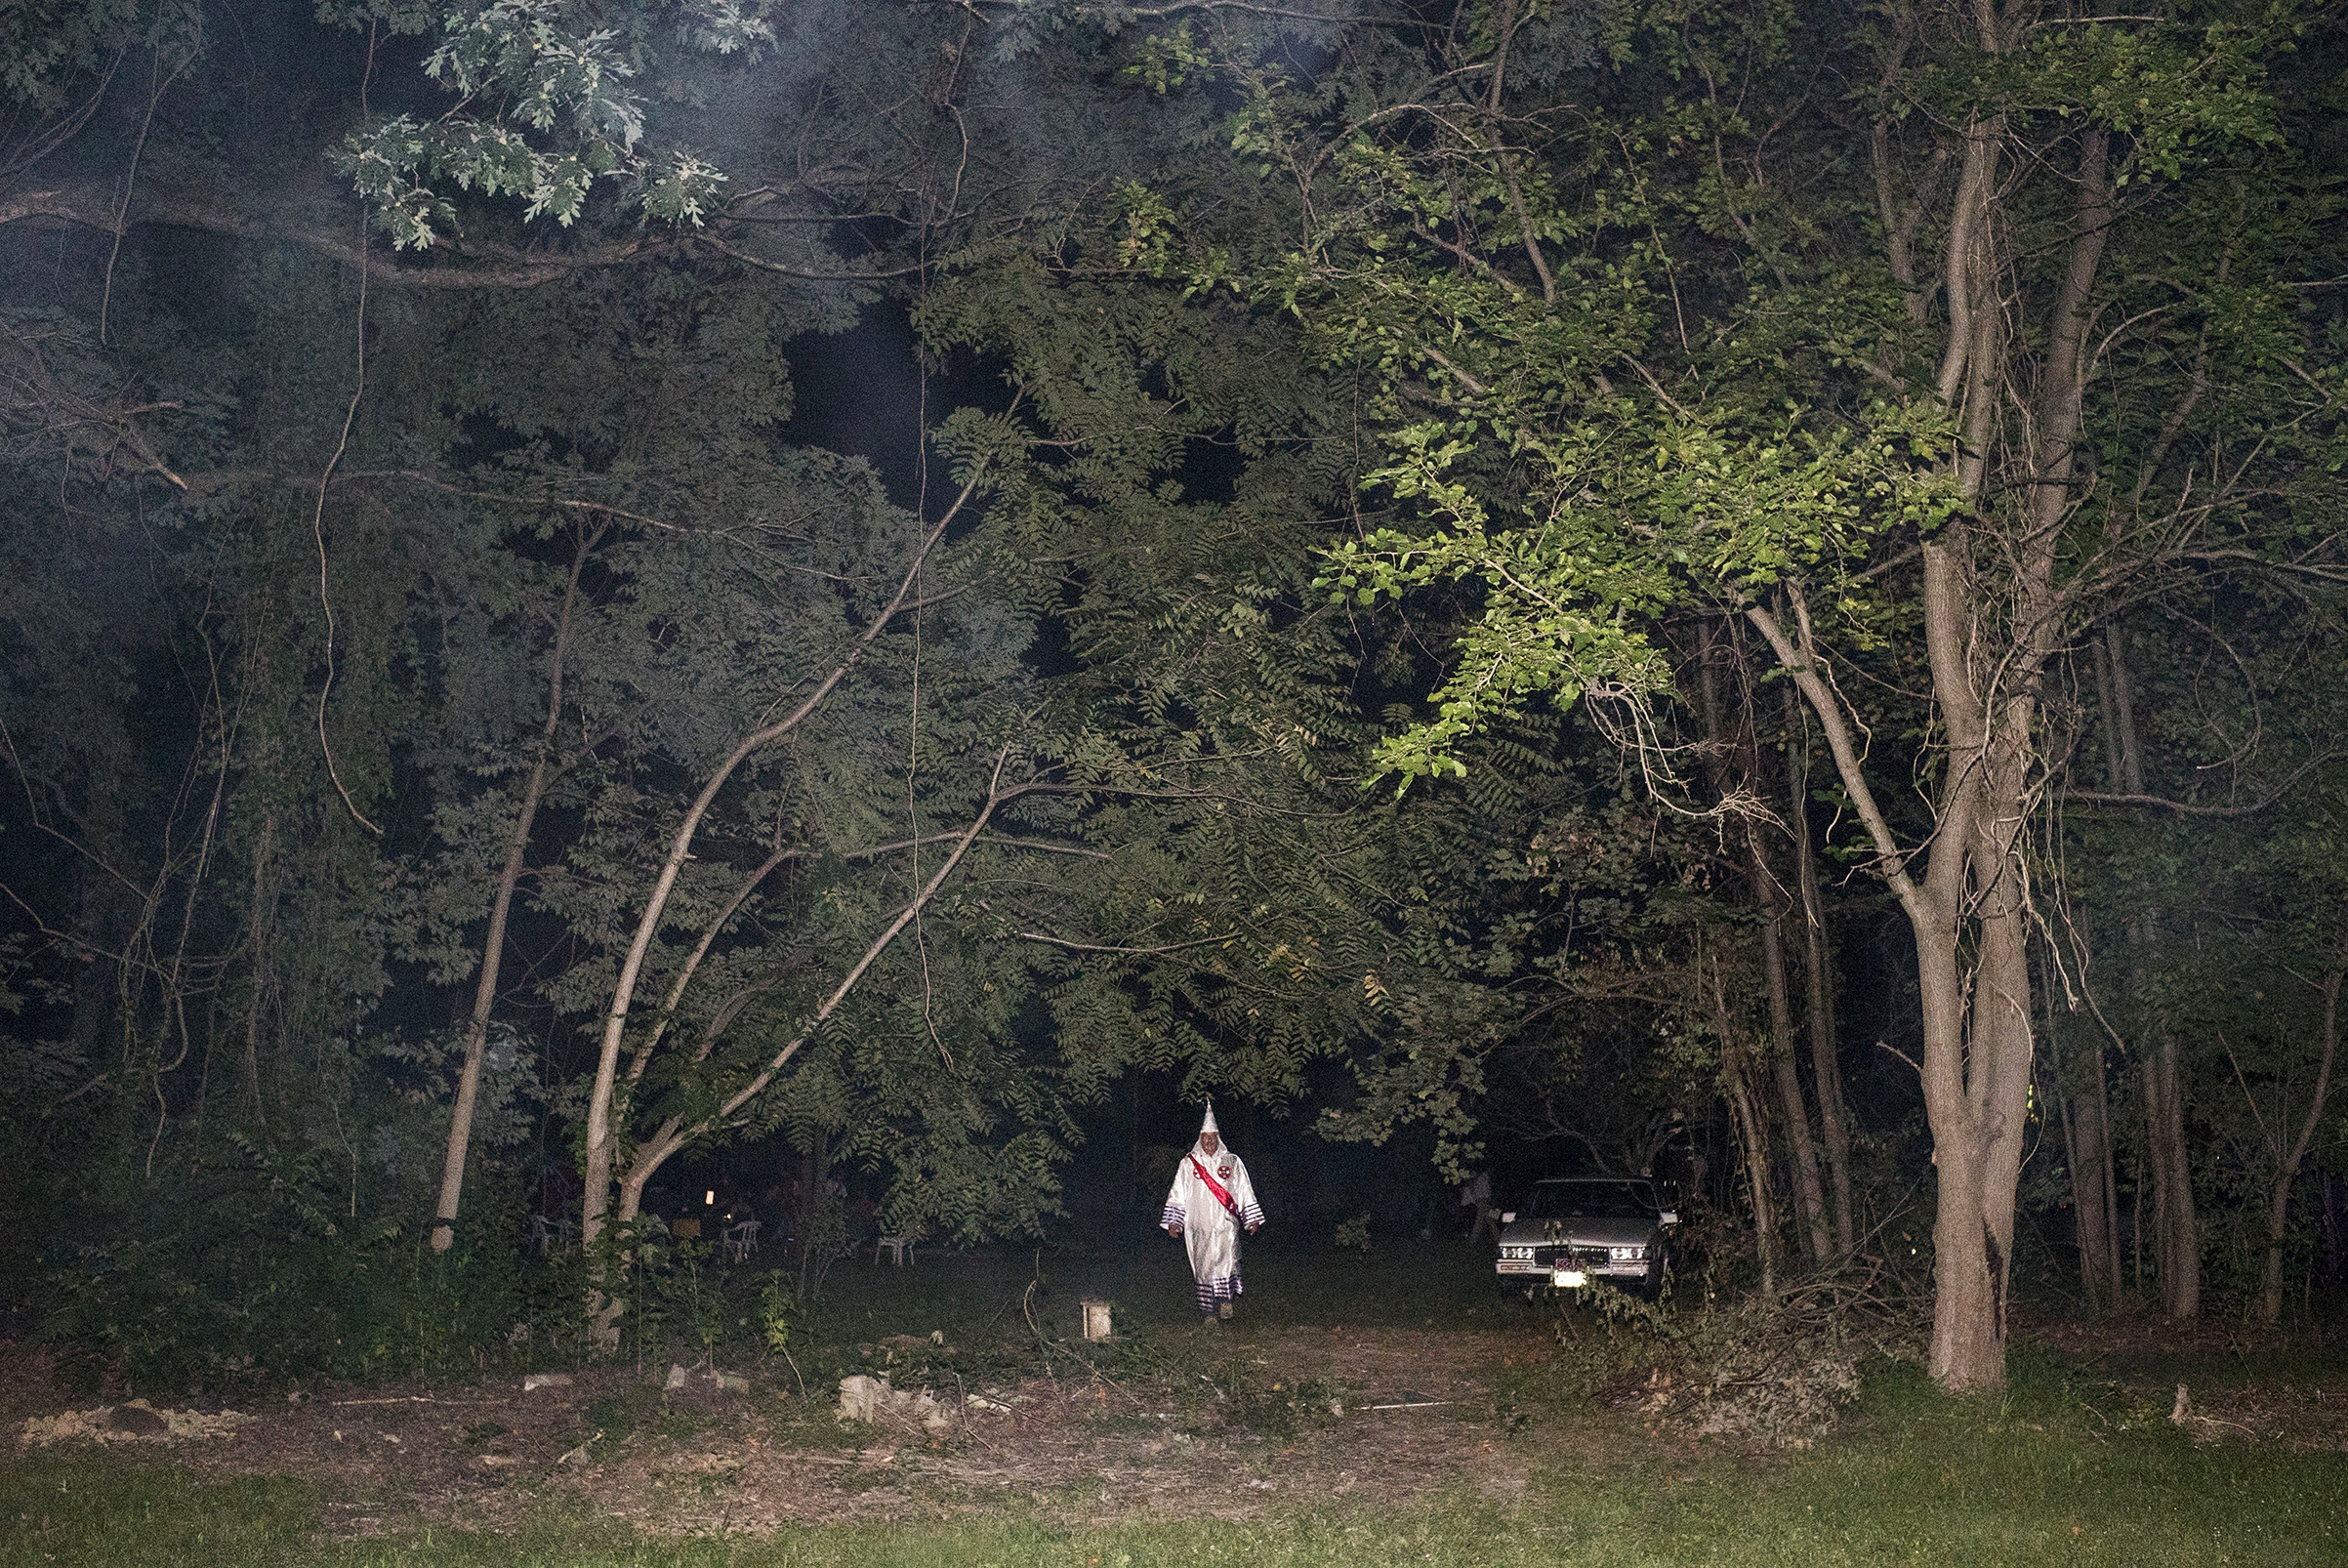 A Ku Klux Klan member in 2015 after a Maryland cross lighting, one of the group’s rituals (Peter van Agtmael—Magnum)